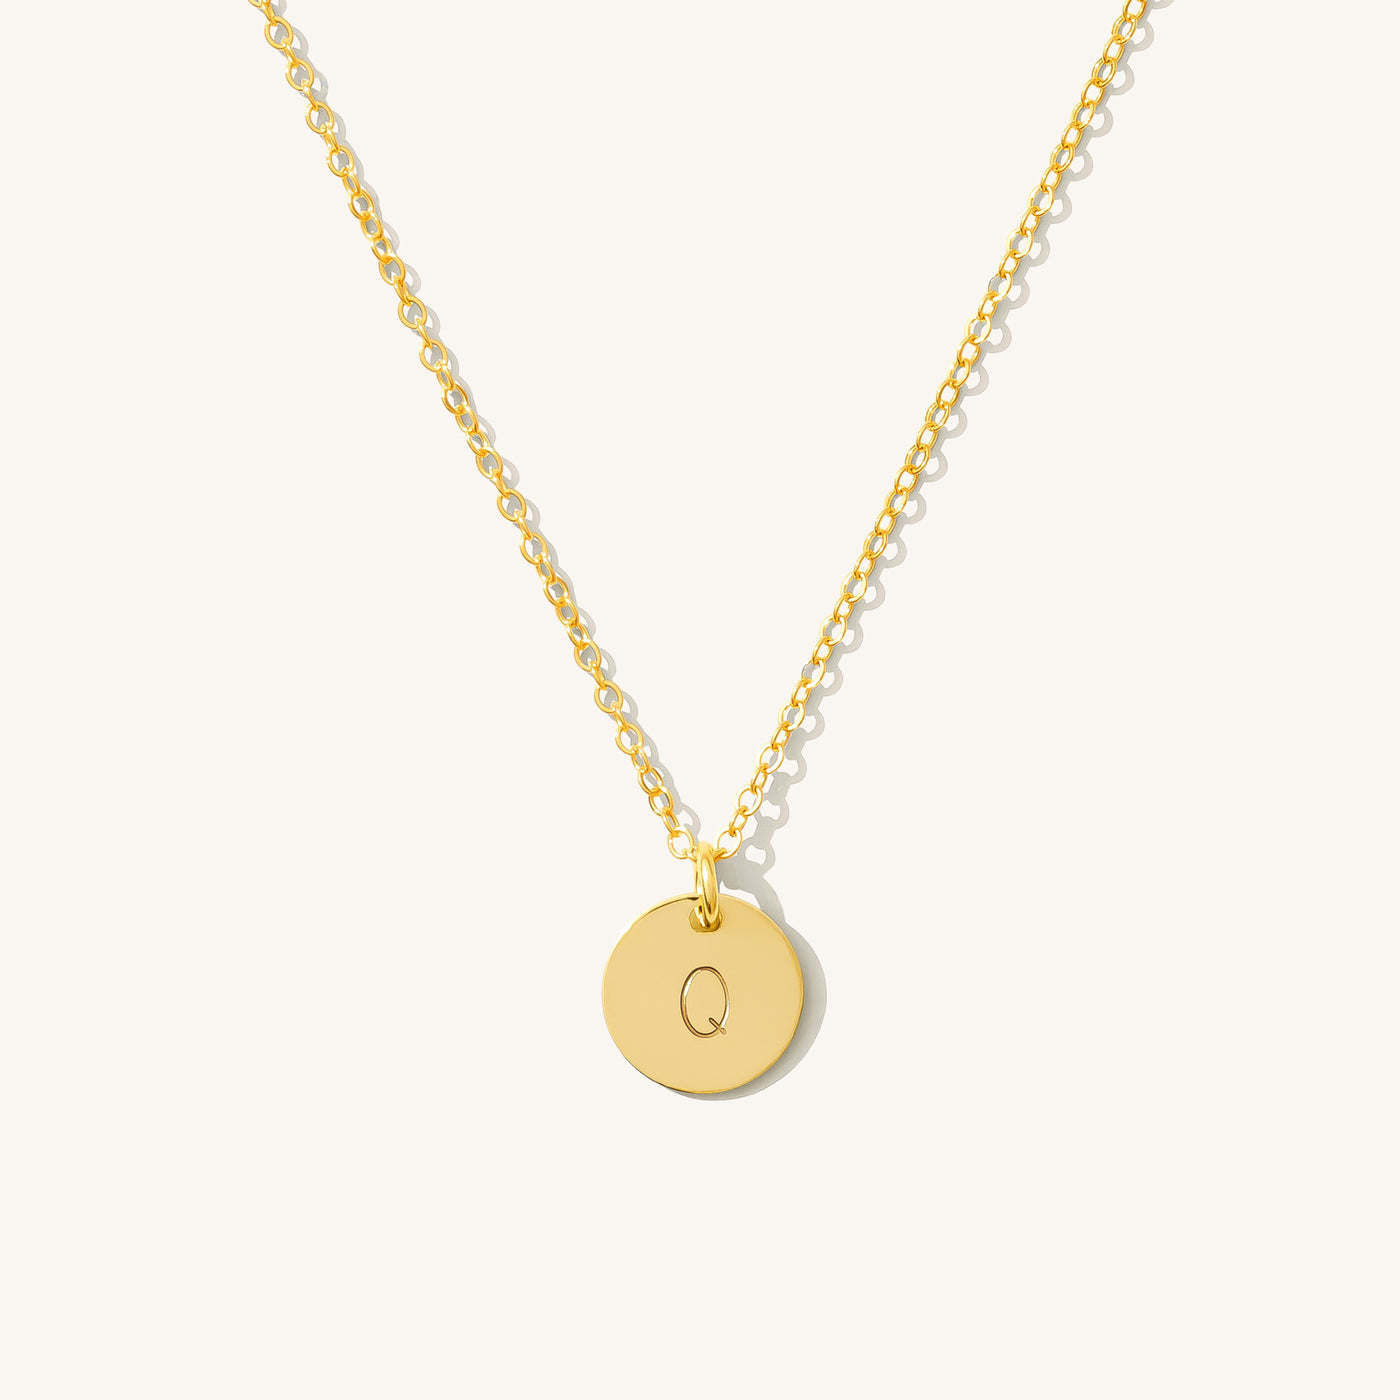 Q Dainty Initial Necklace